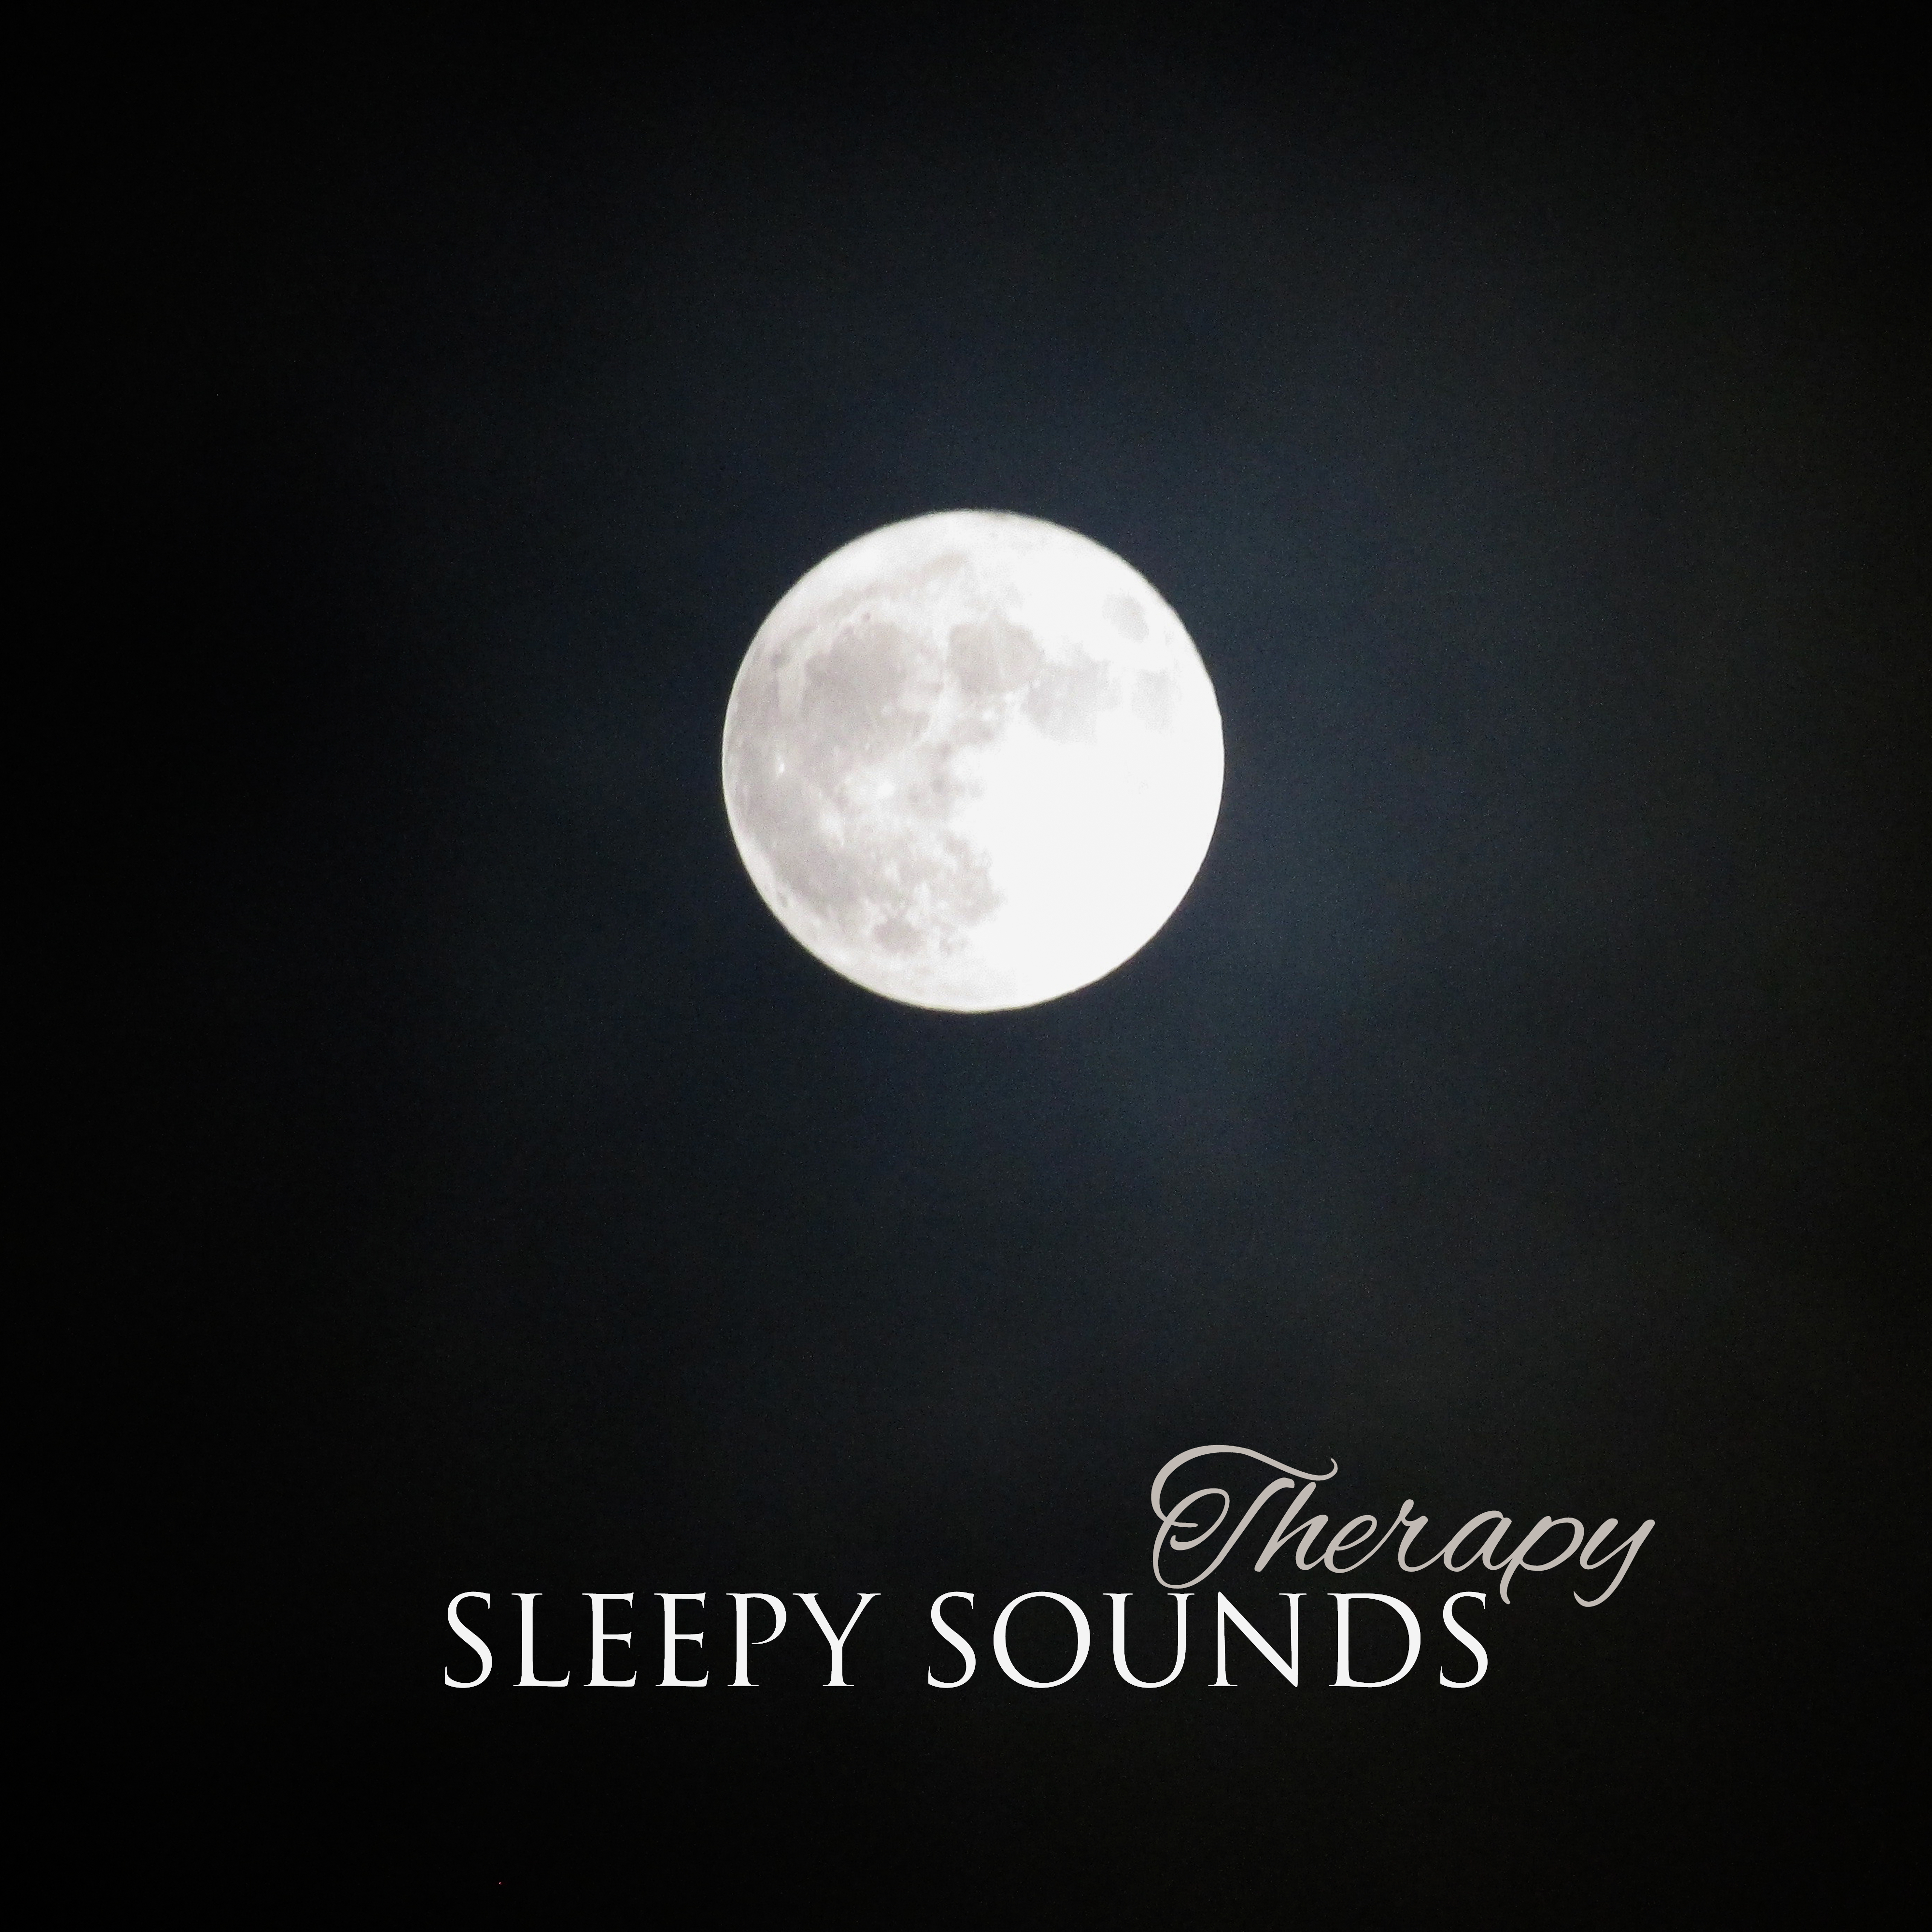 Sleepy Sounds Therapy – Relaxing Music Therapy for Sleep, Cure Insomnia, Restless Sleep, Relief Stress, Deep Sleep